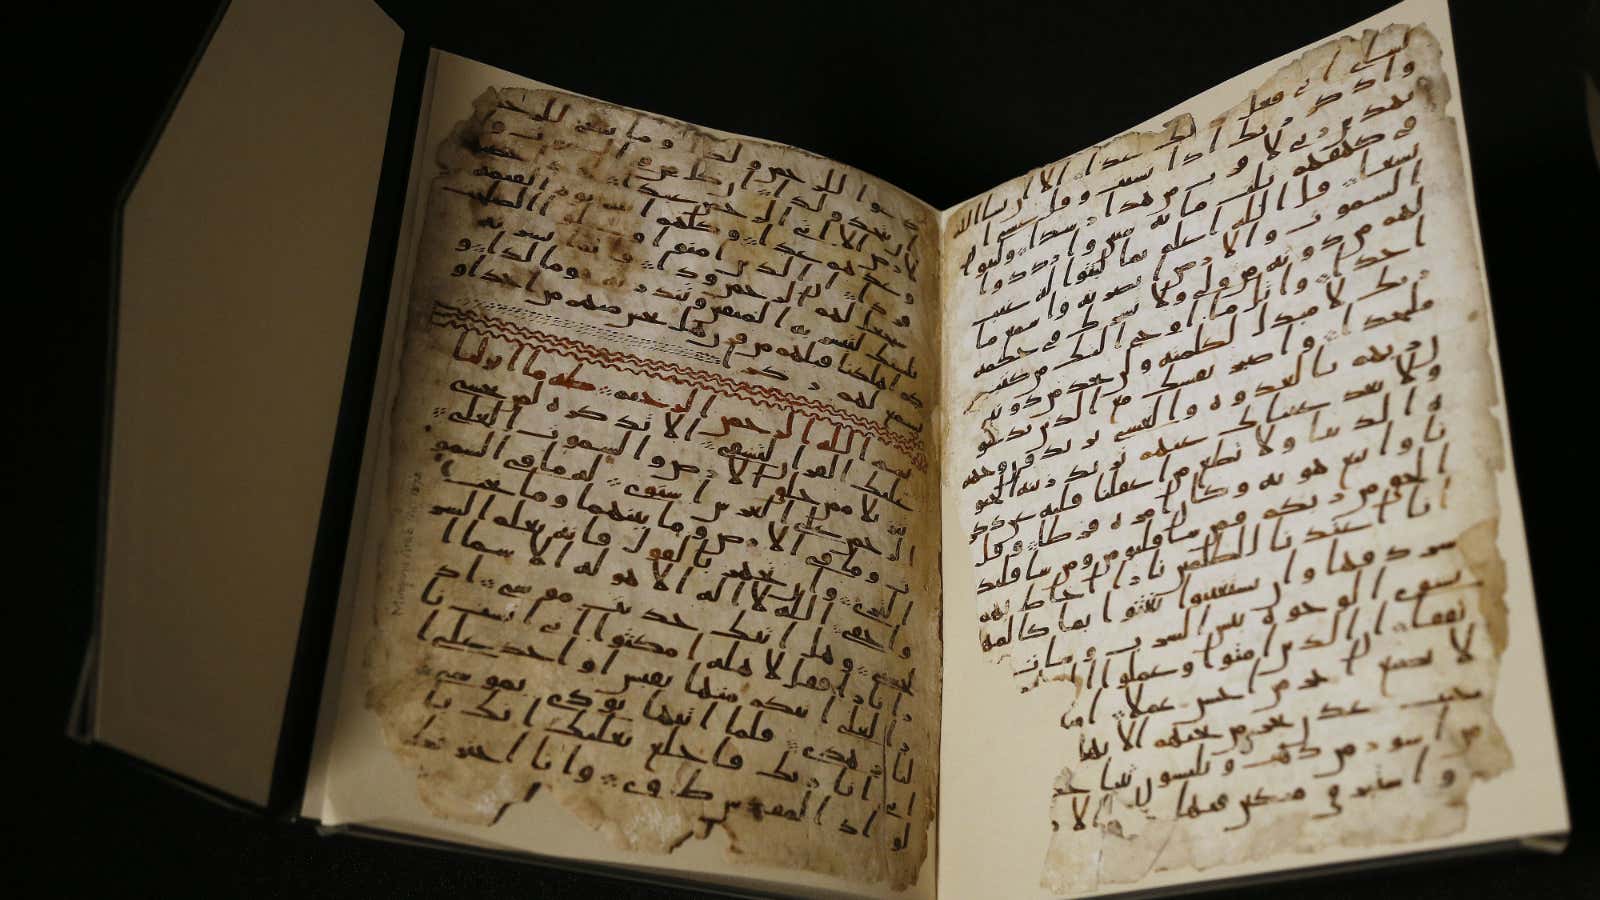 A university assistant shows fragments of an old Quran at the University in Birmingham.